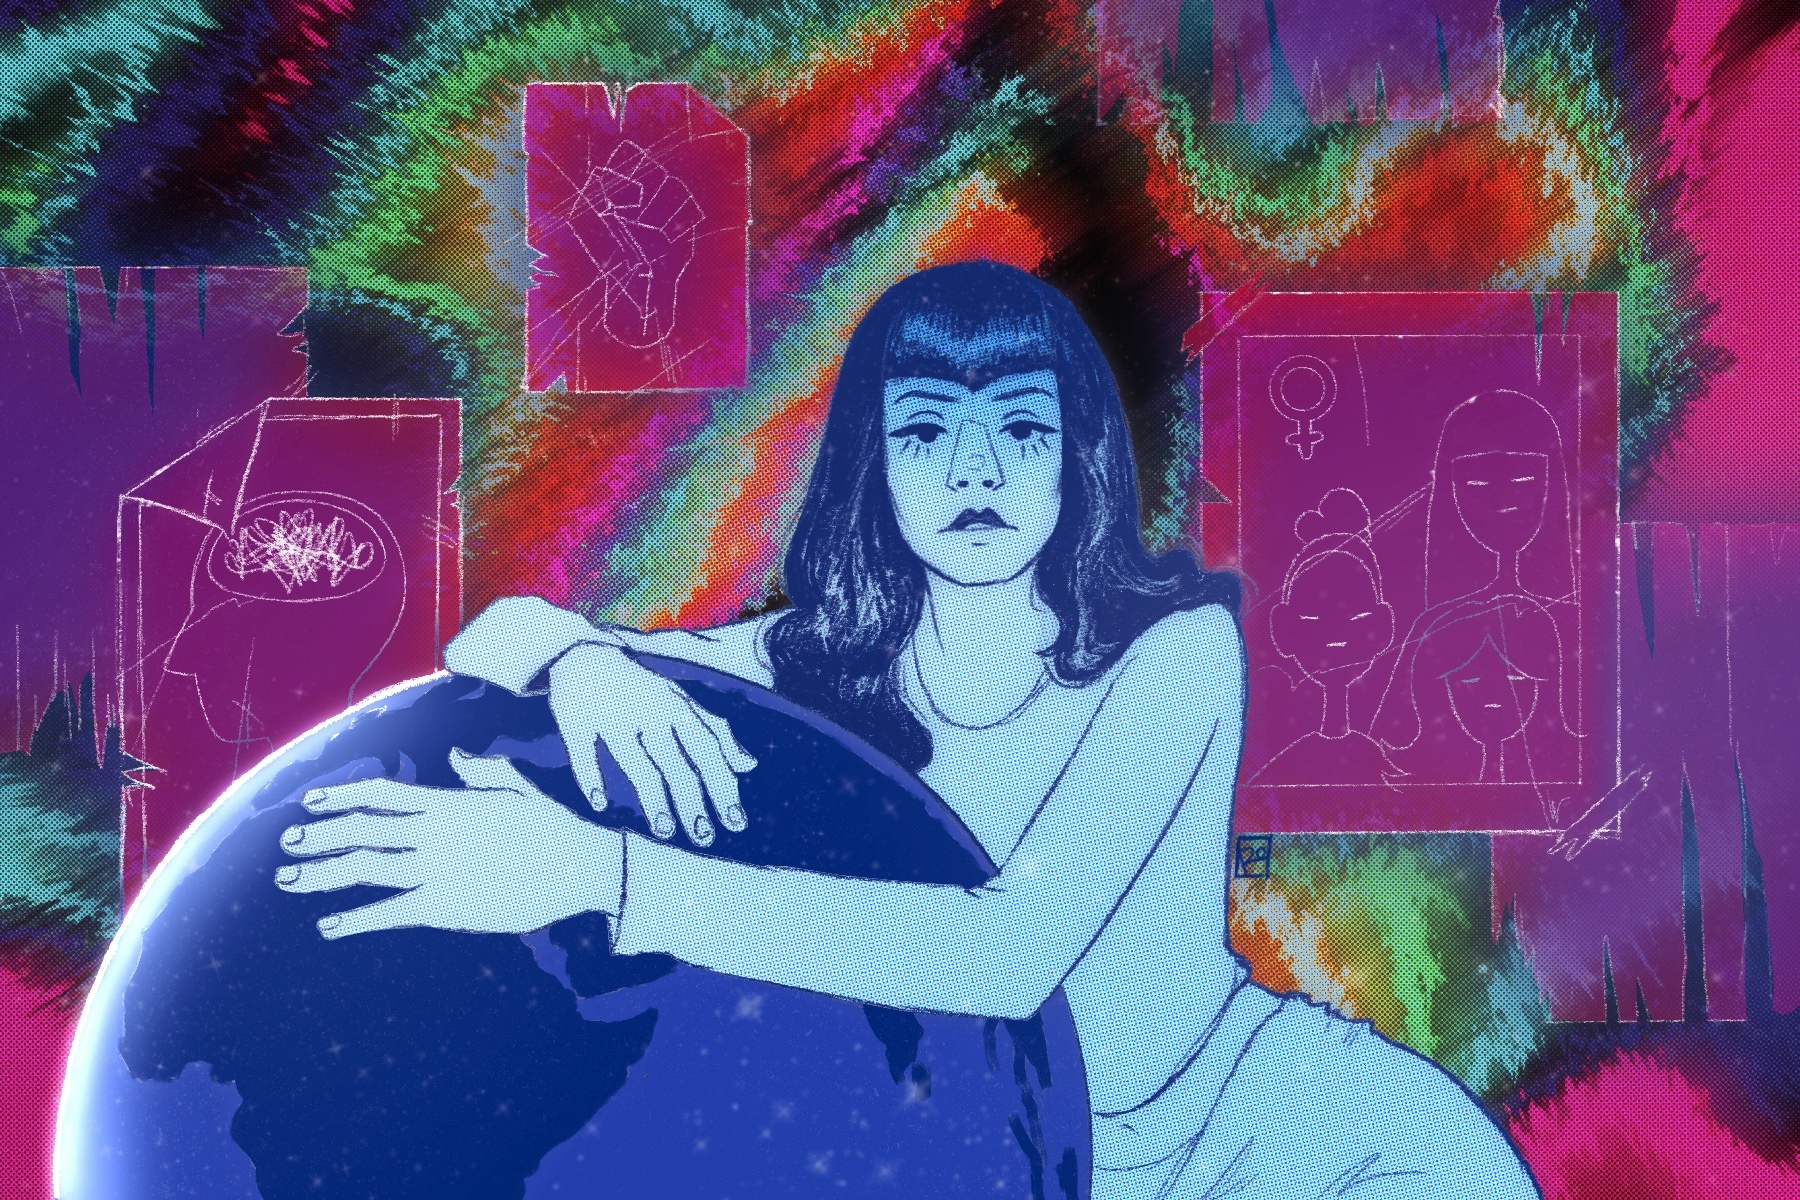 In an article about Ancient Dreams in a Modern Land, An illustration of Marina Diamandis